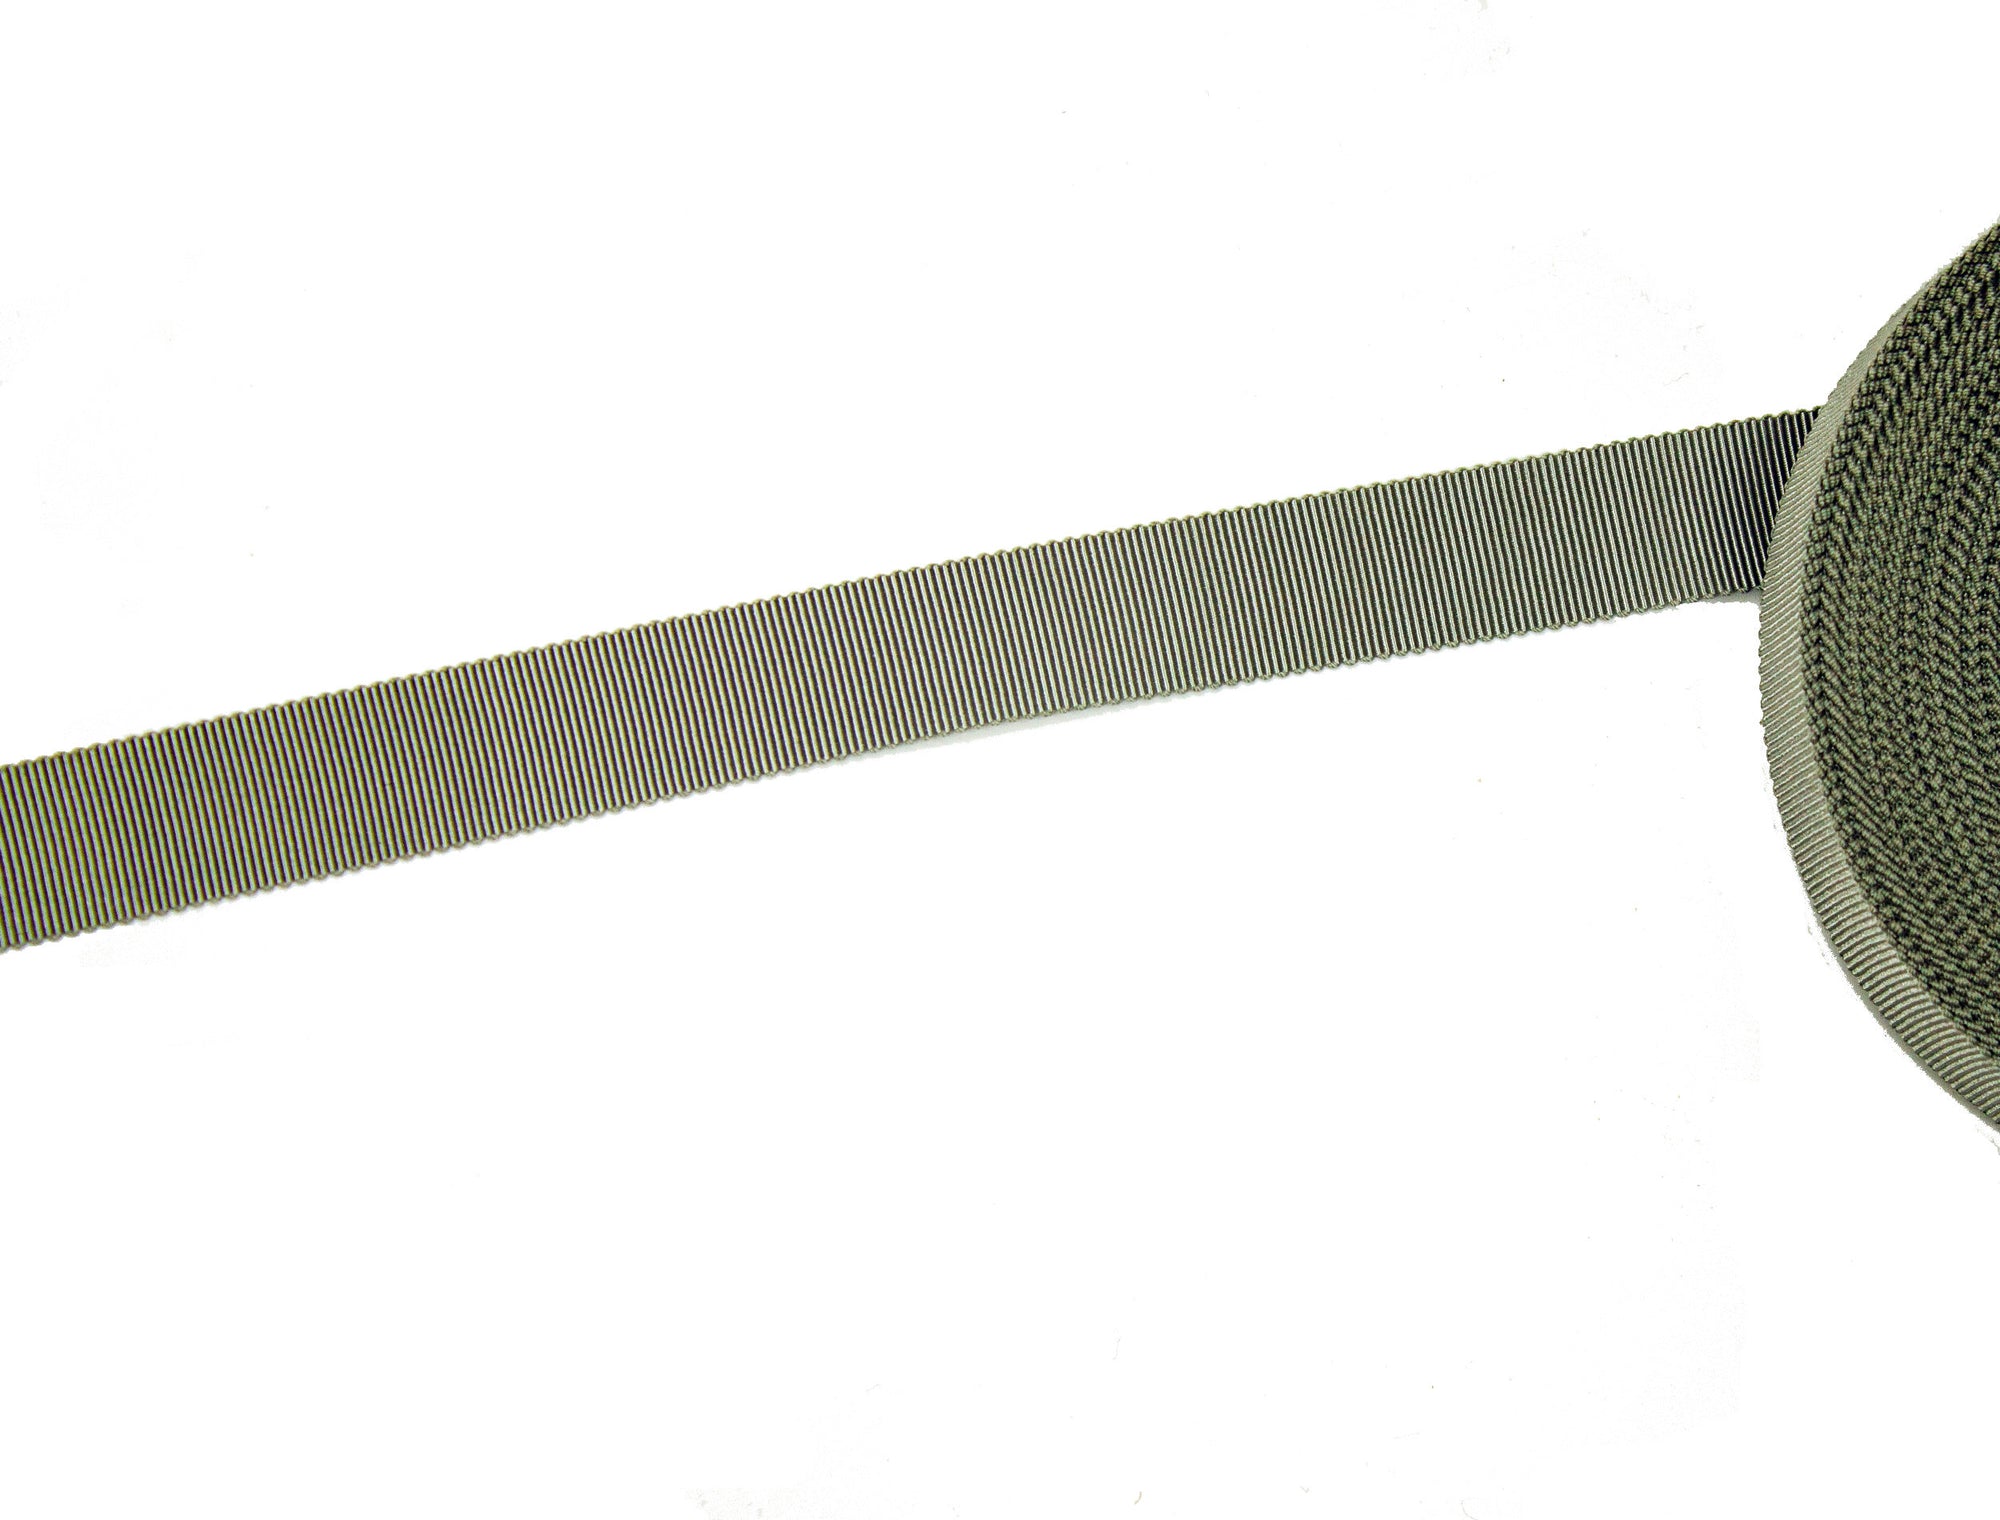 Vintage Petersham Ribbon Gray Measures 19 mm Wide - Sold by the Yard